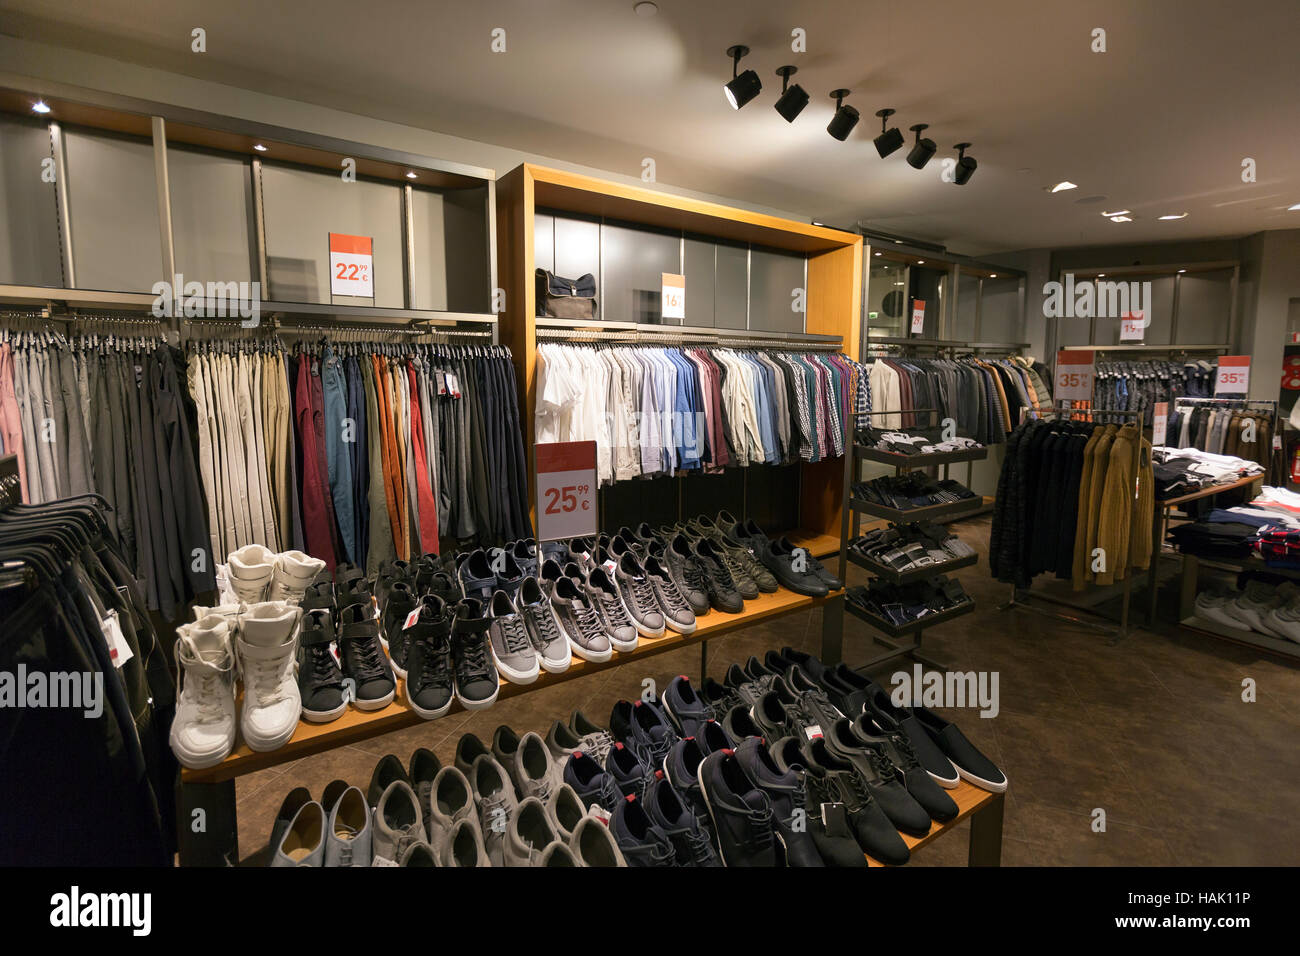 interior of casual clothes and shoes shop Stock Photo